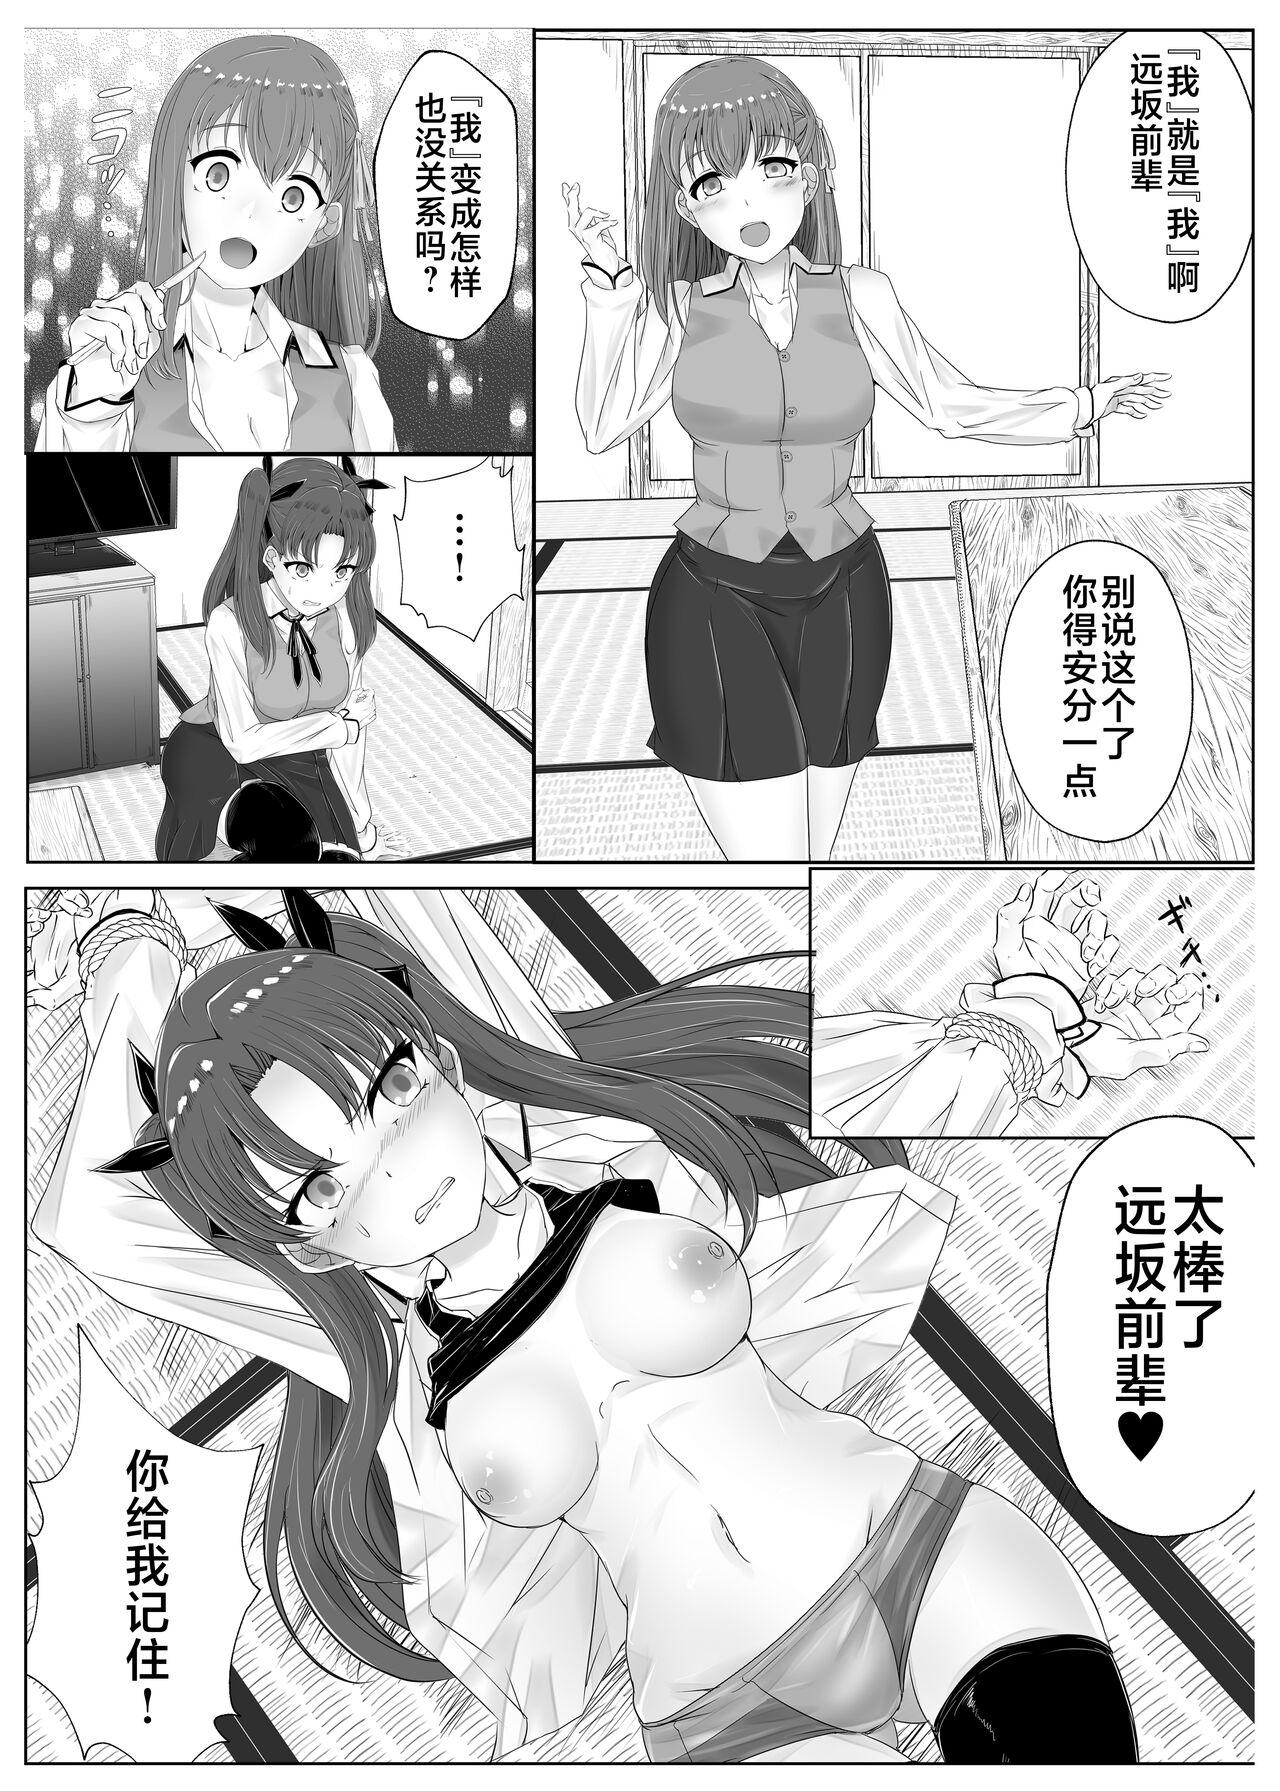 Humiliation 遠坂凛乗り換え乗っ取り - Fate stay night Off - Page 3